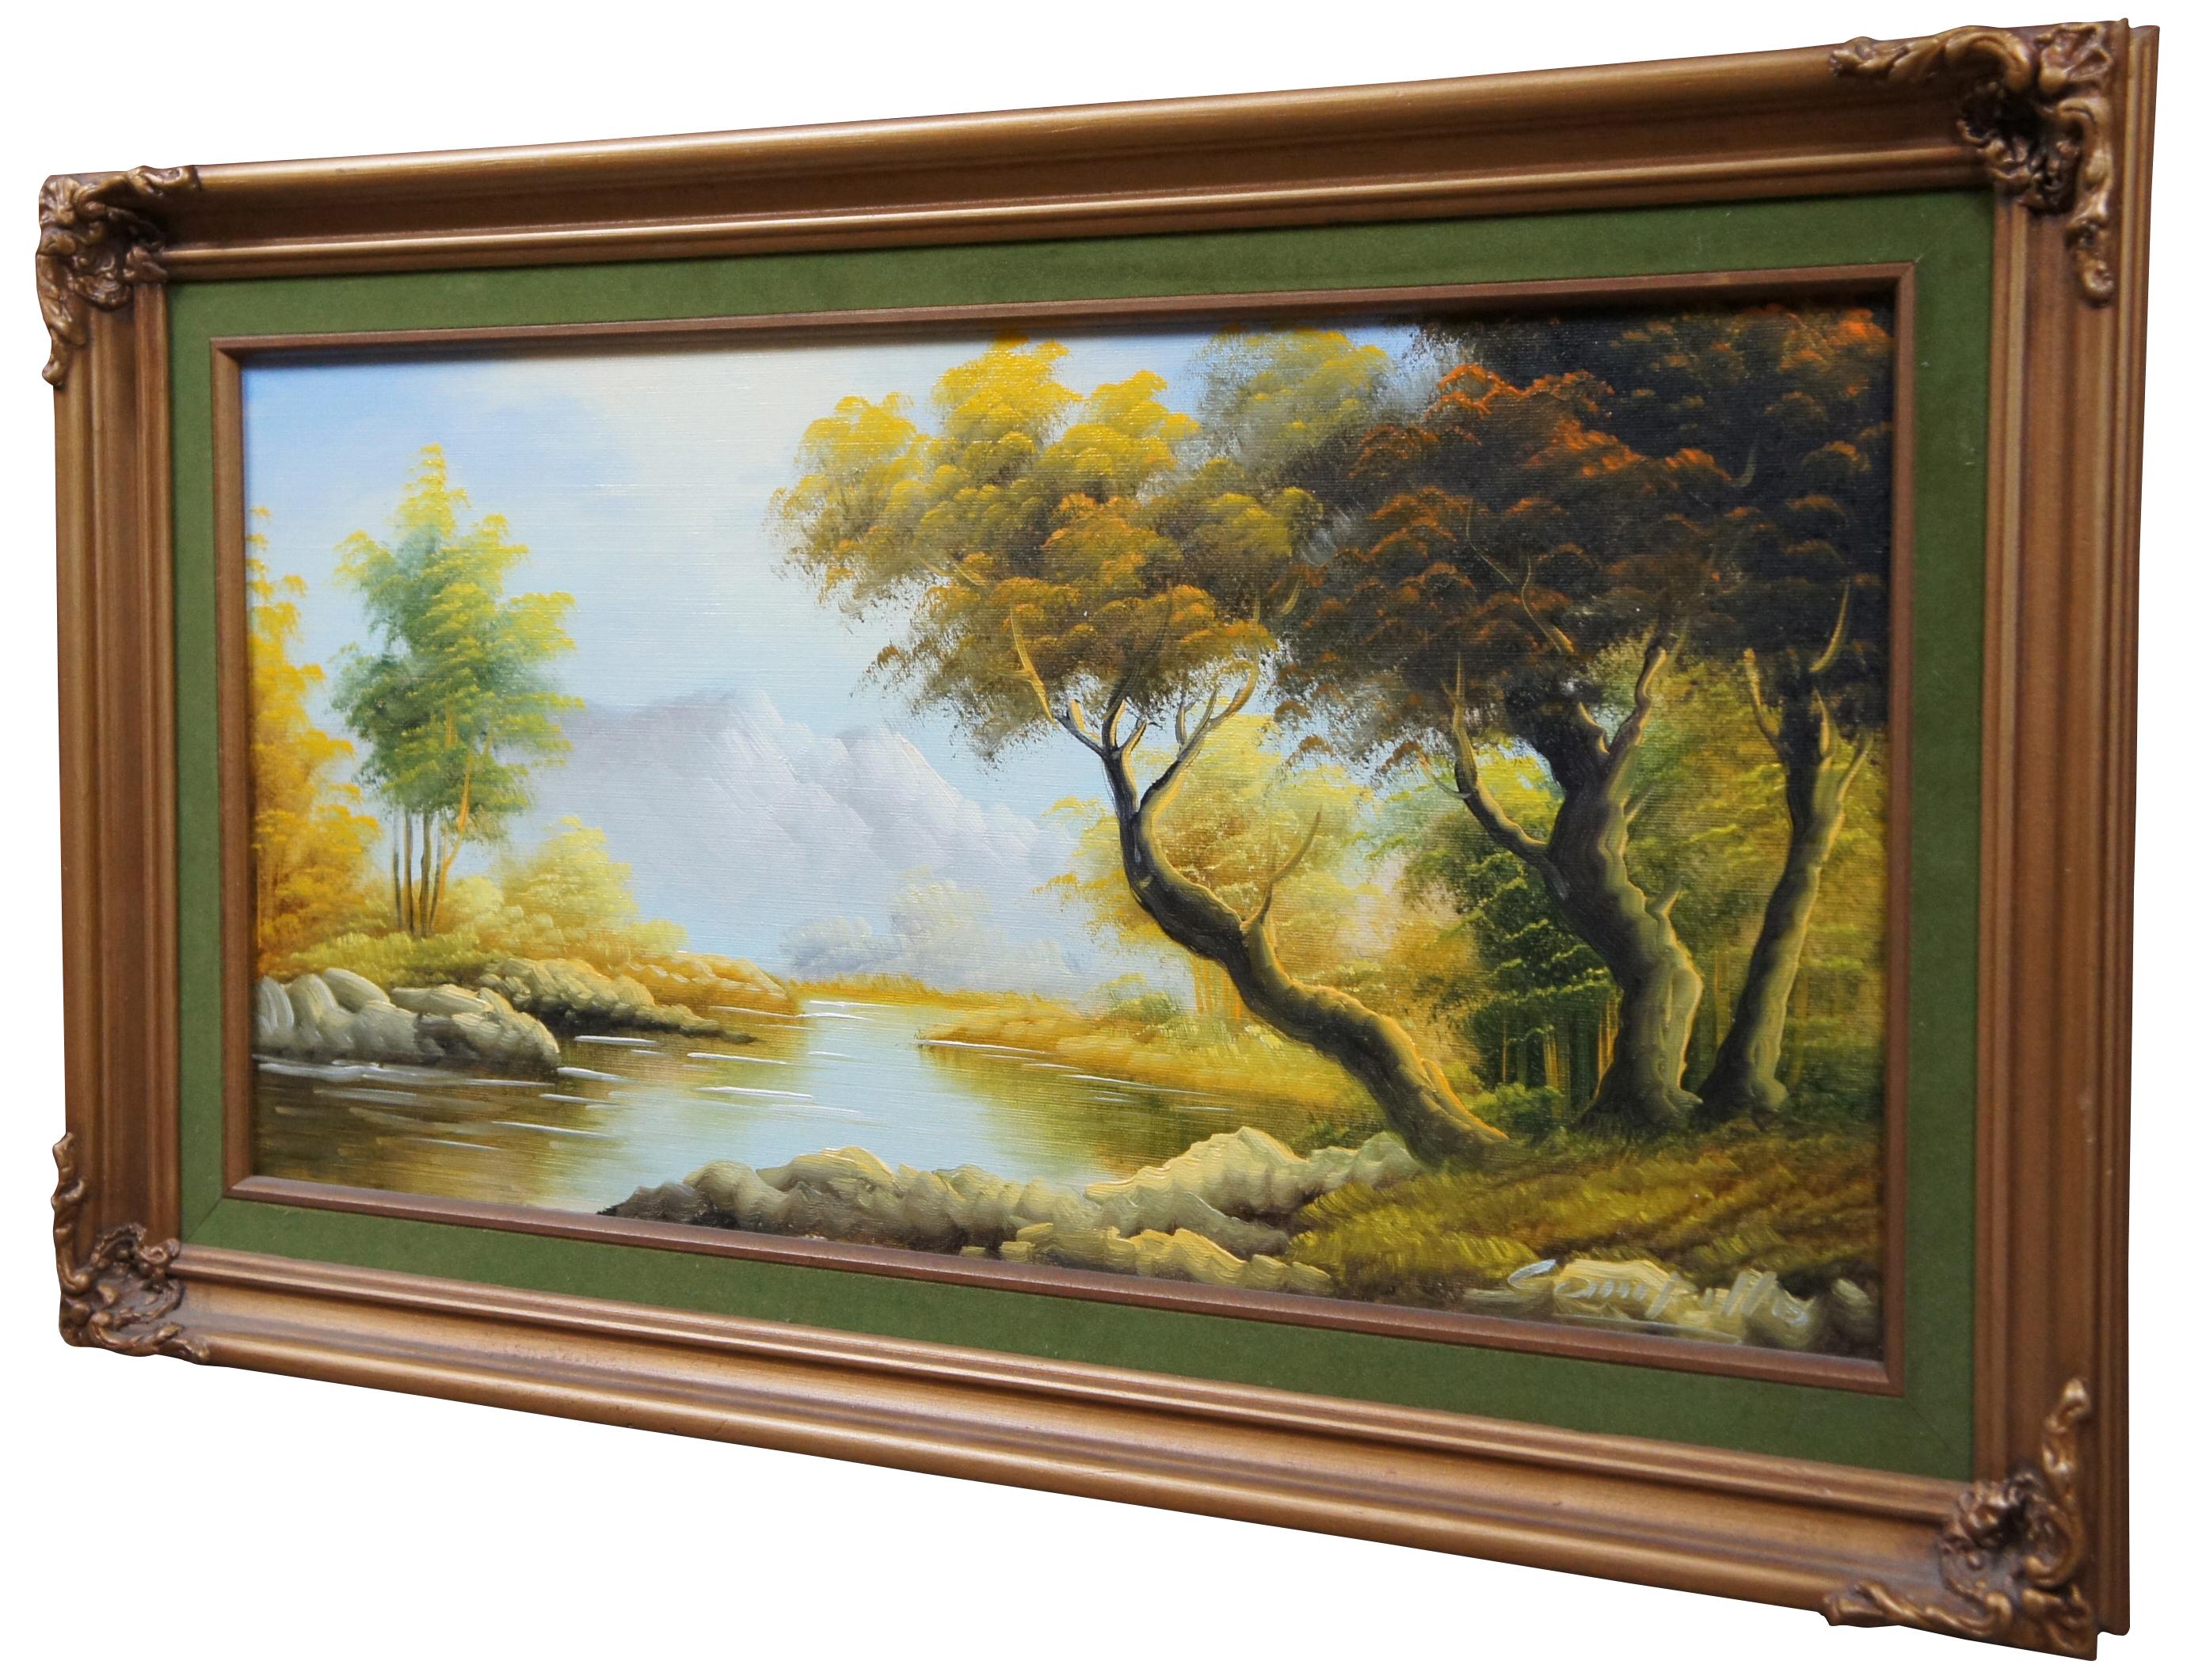 Vintage oil on canvas painting showing a Autumn landscape with river and mountains; signed Campillo in the lower corner.

Measures: 28.75” x 1.5” x 16.5” / Sans Frame - 23.5” x 11.5” (Width x Depth x Height).